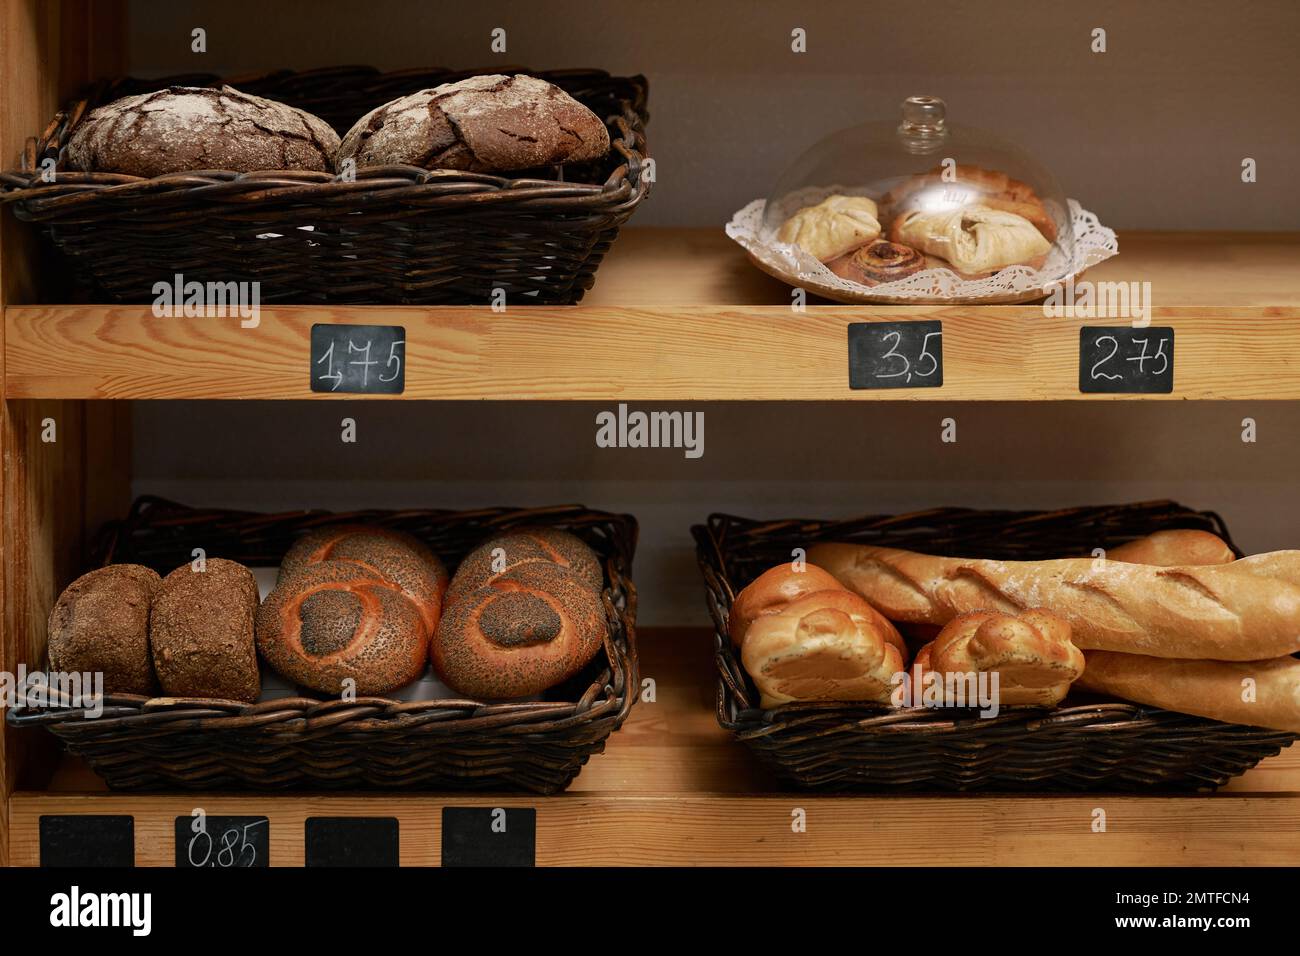 Baskets with various types of bread and price tags on shelves in bakery Stock Photo